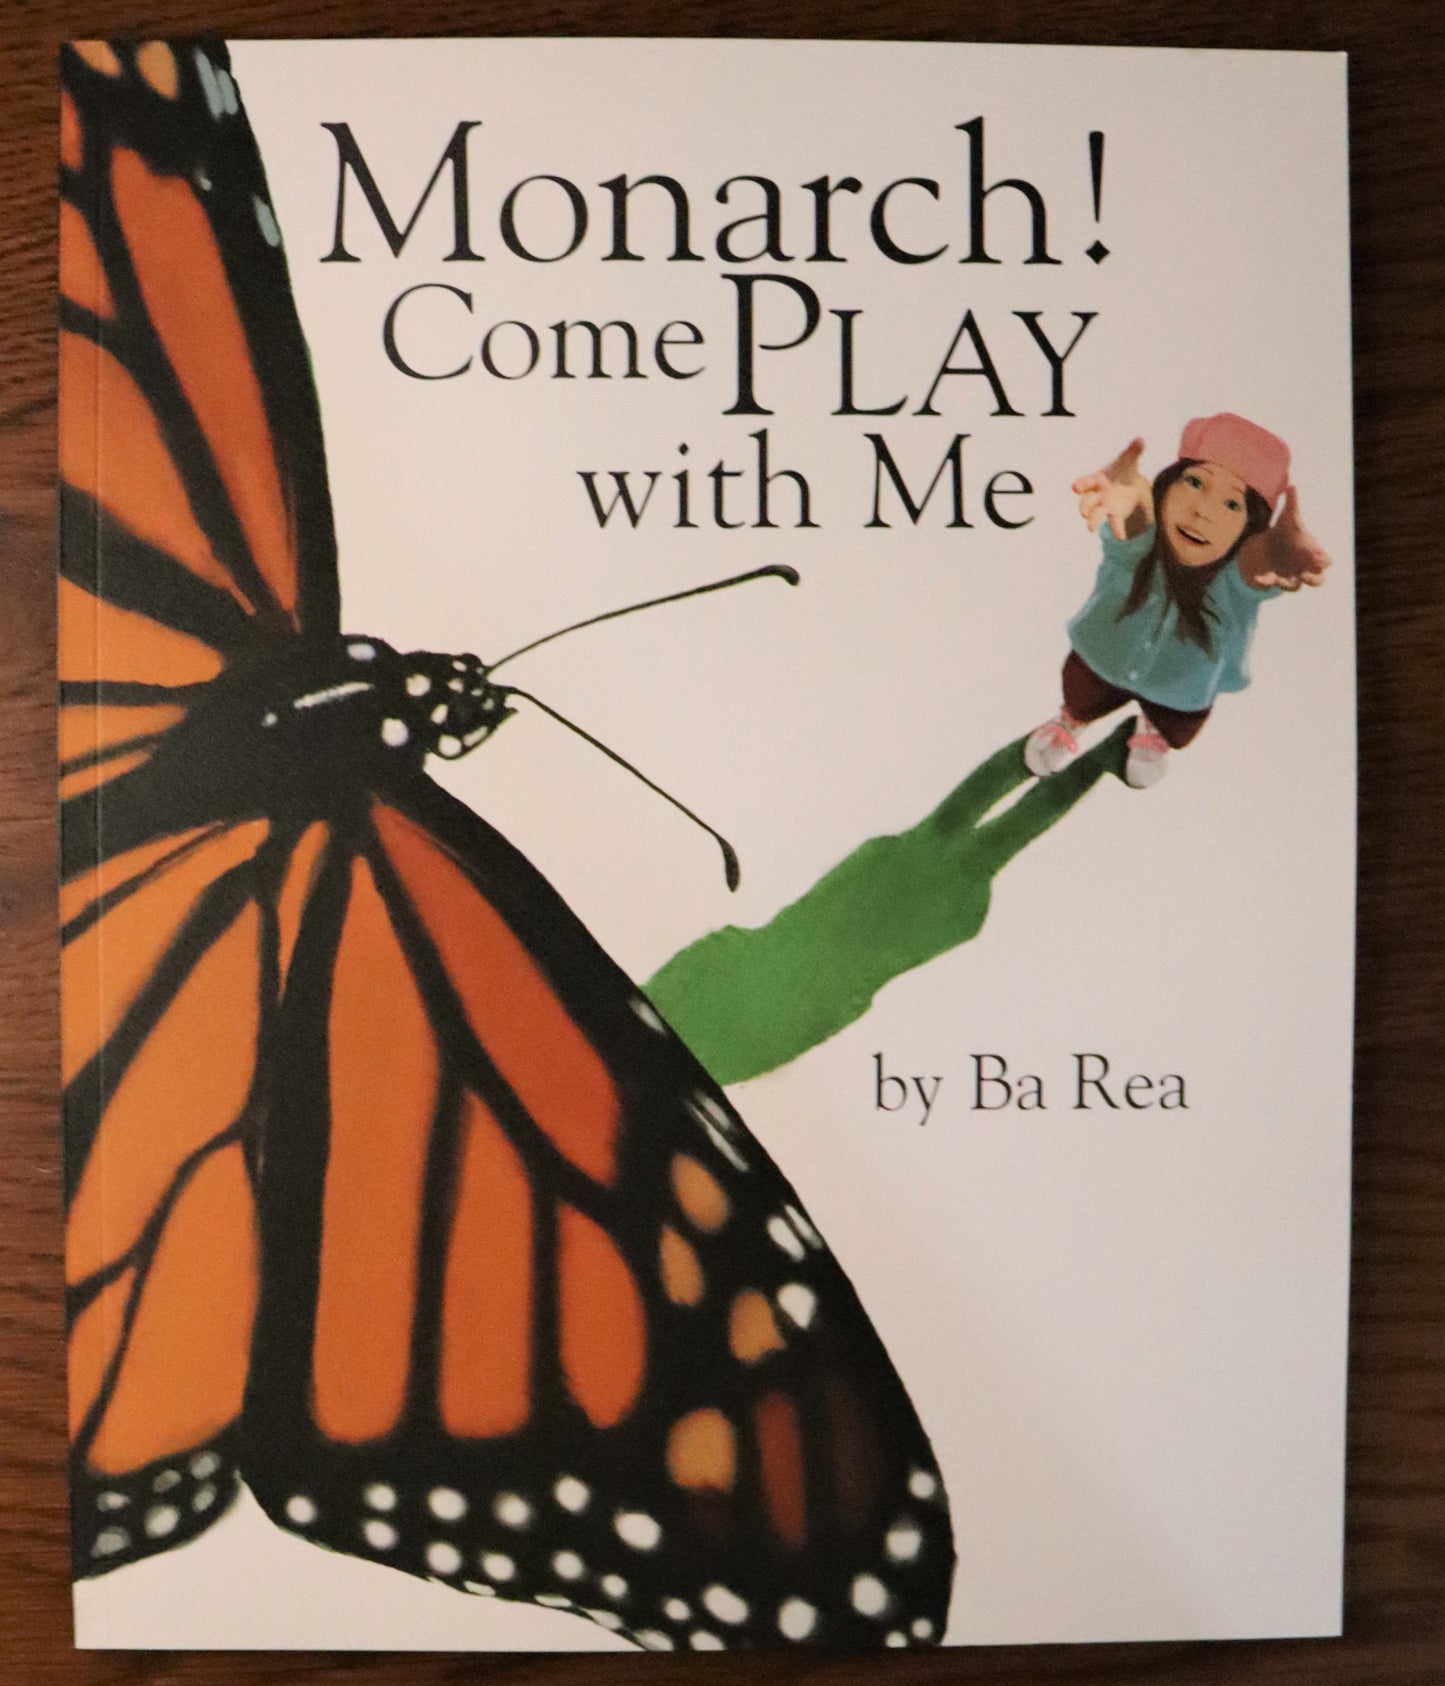 Monarch! Come Play With Me